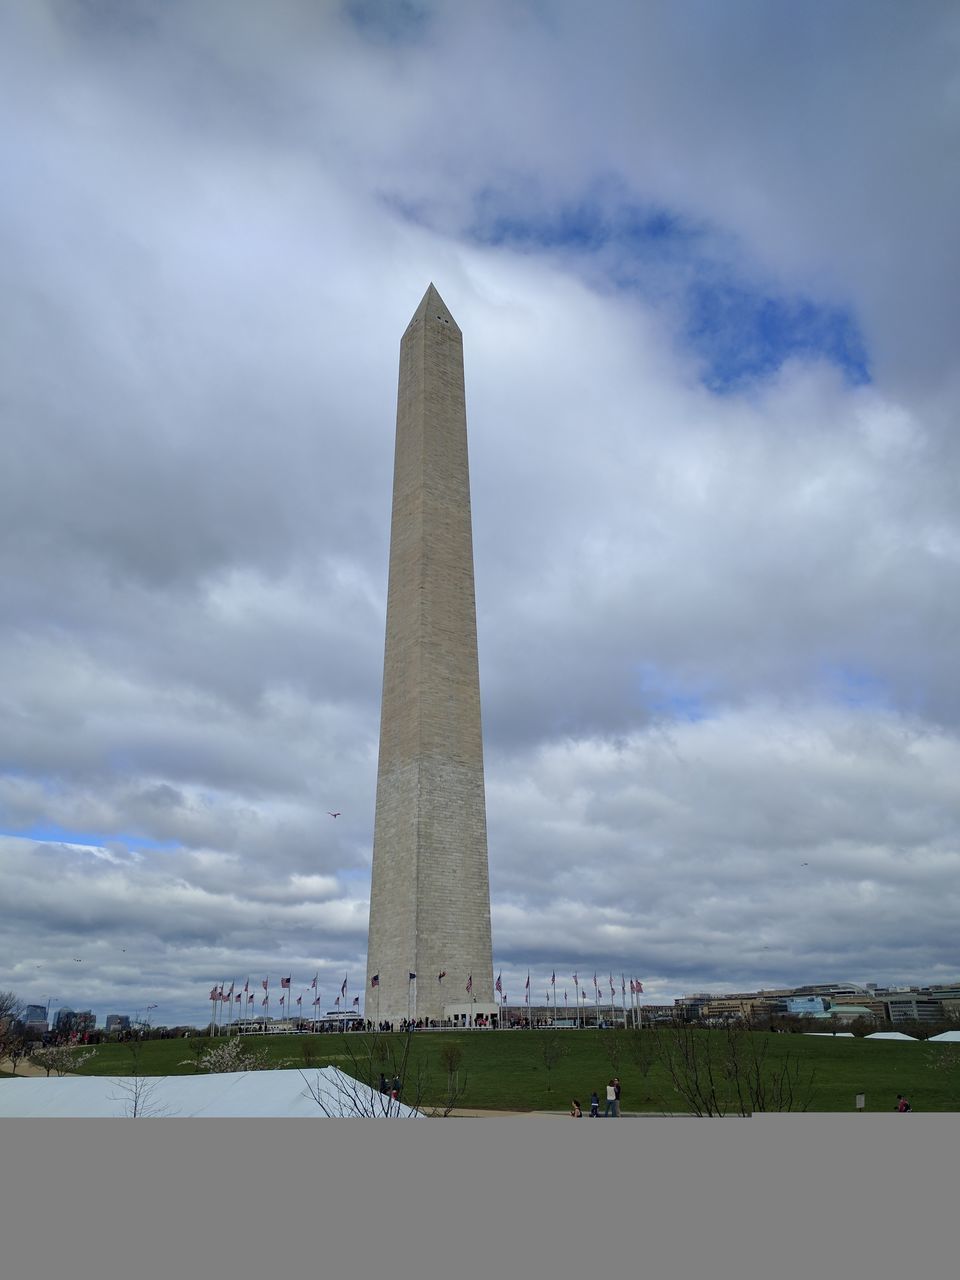 National Monument Architecture Built Structure Cloud - Sky Day Low Angle View Nature No People Outdoors Sky Travel Destinations